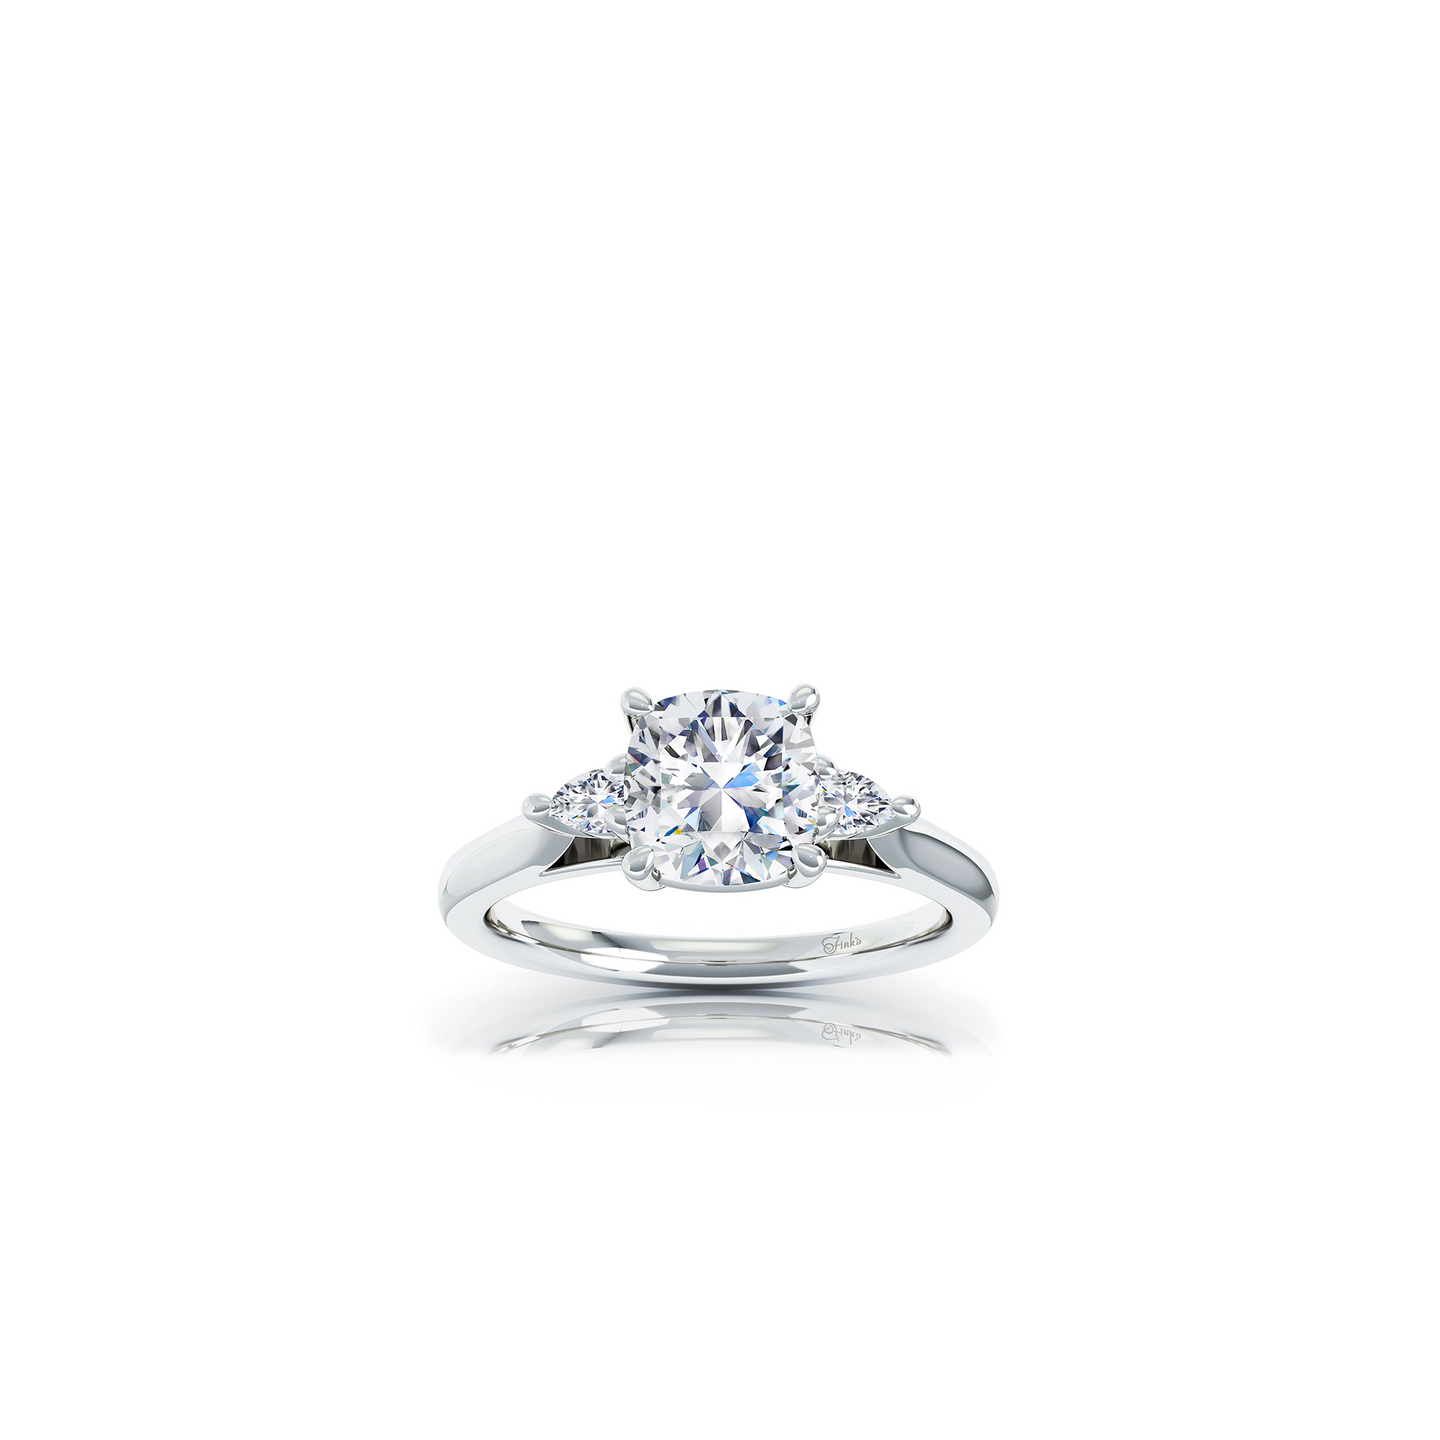 The Studio Collection Cushion Cut Center Diamond with Side Diamond Accents Engagement Ring